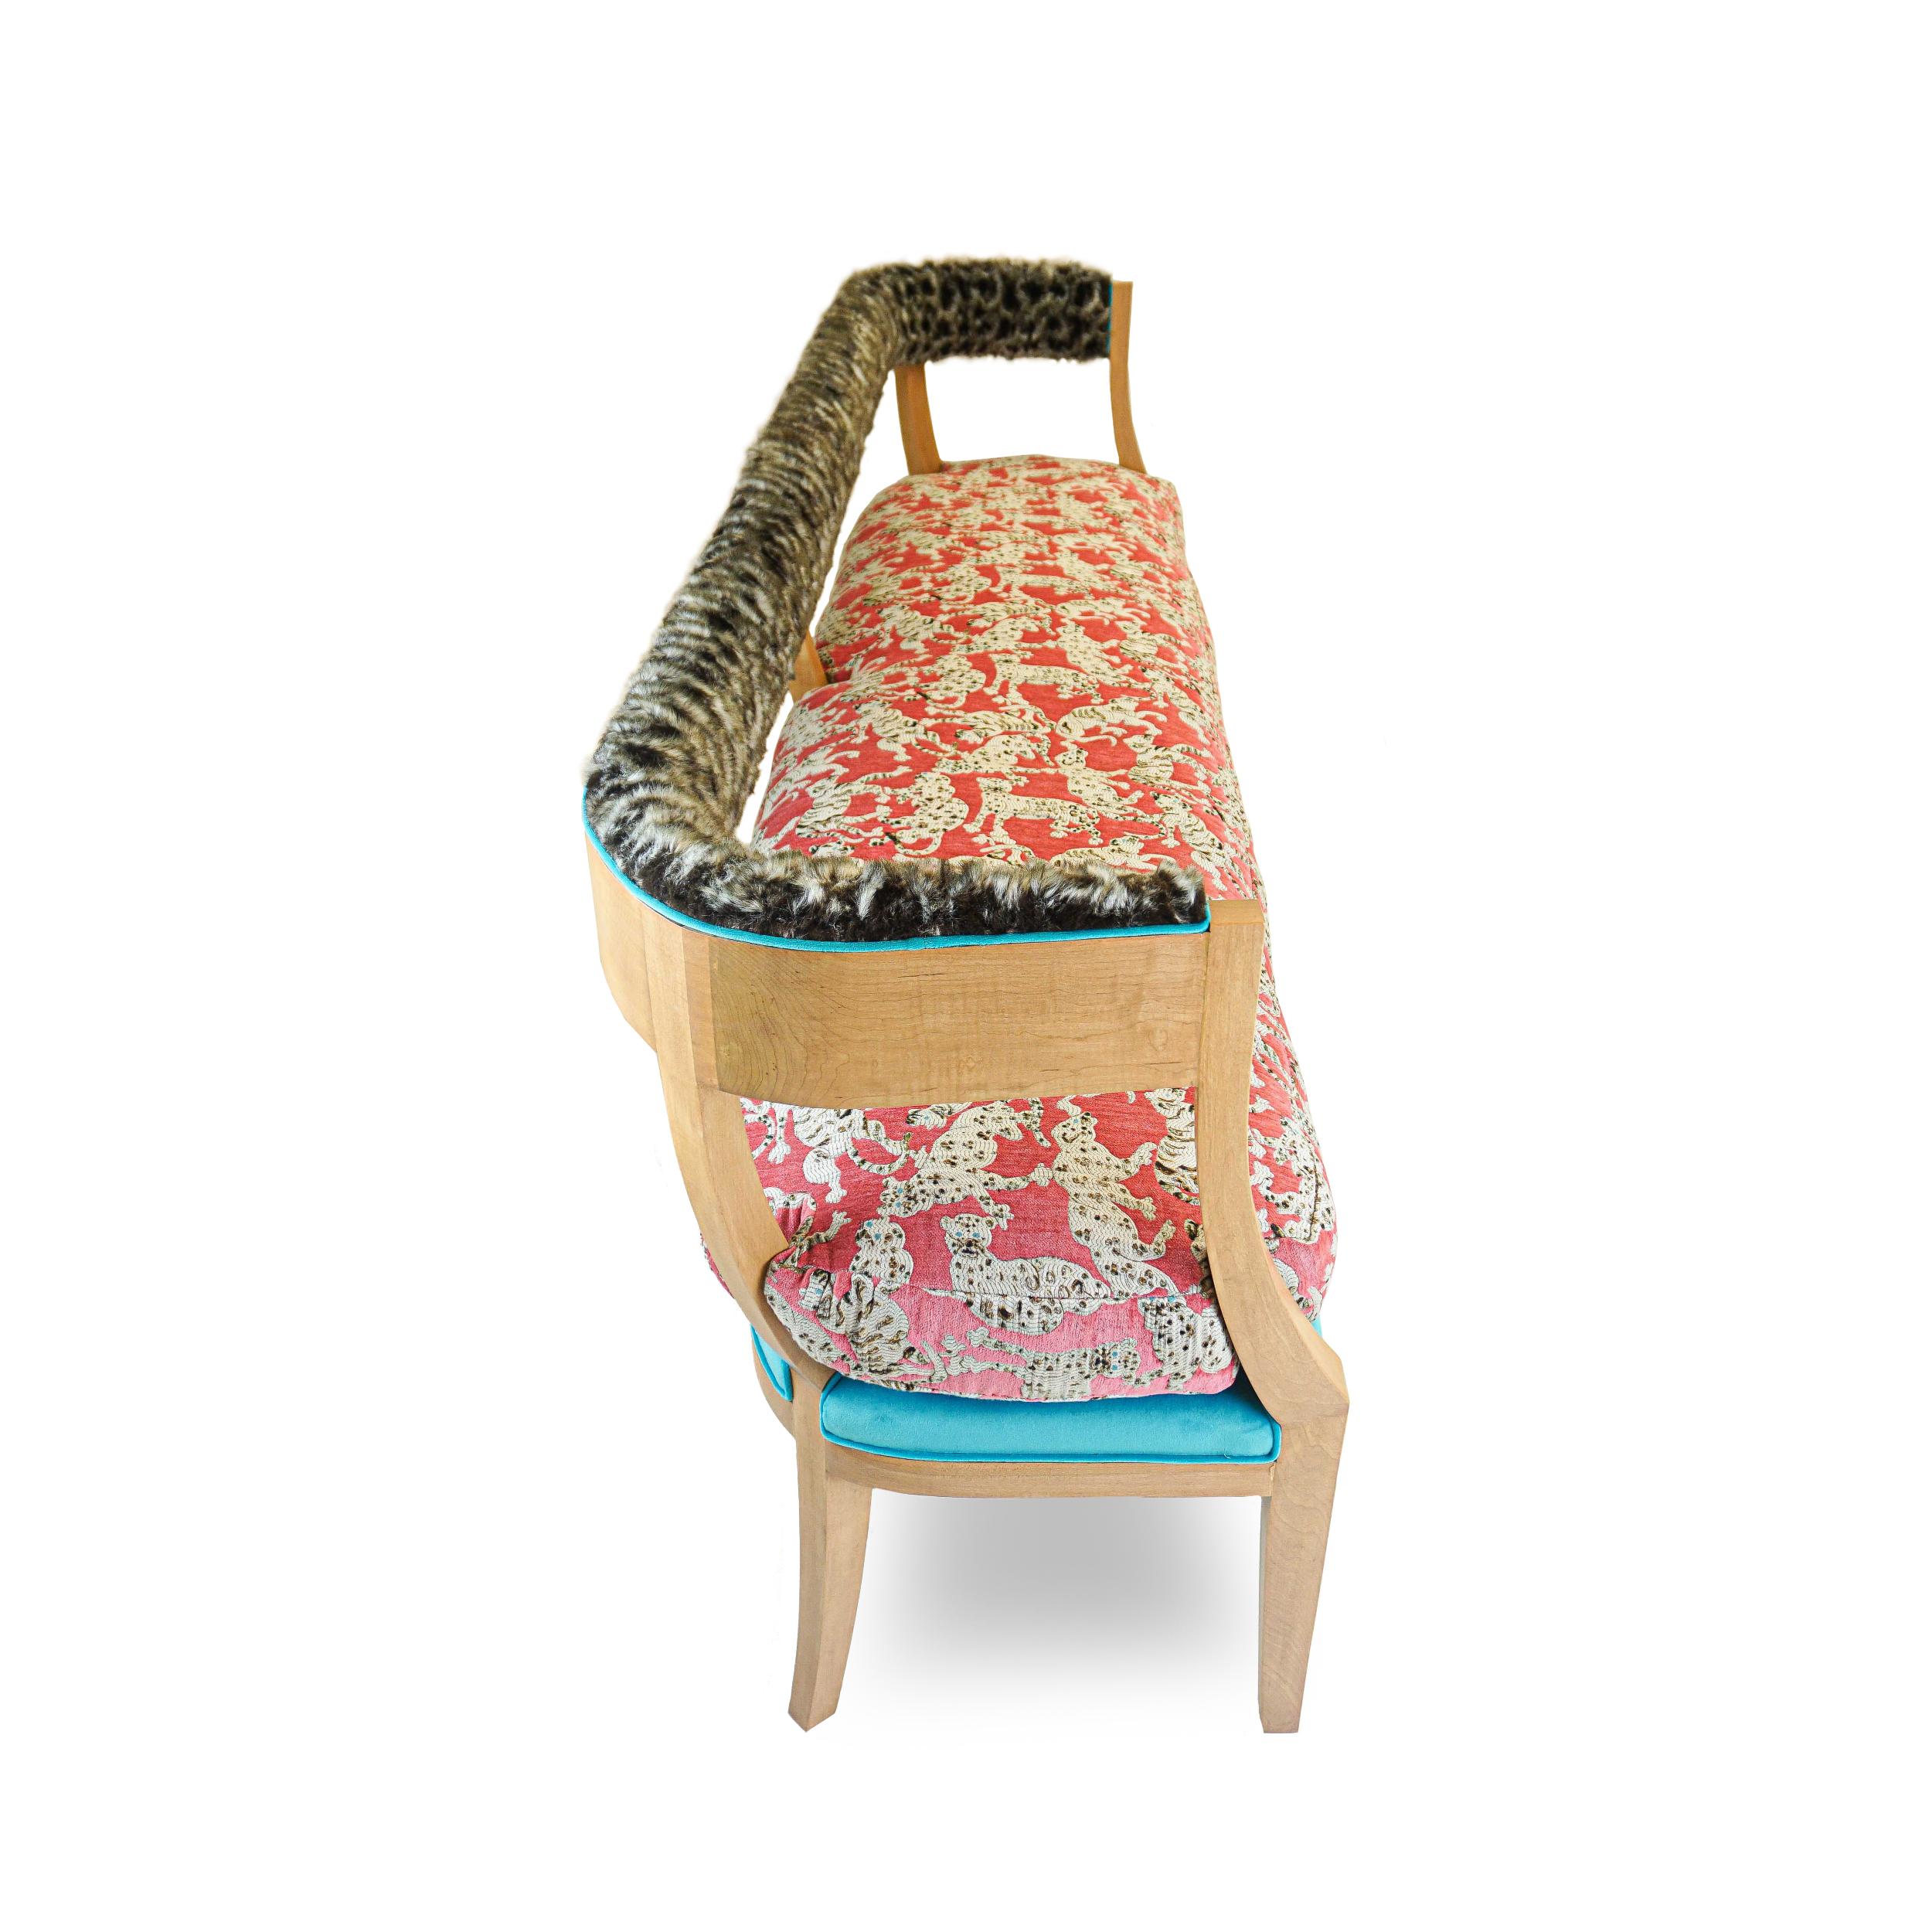 Contemporary Japanese Inspired Bench with Wild Cat Print and Faux Fur For Sale